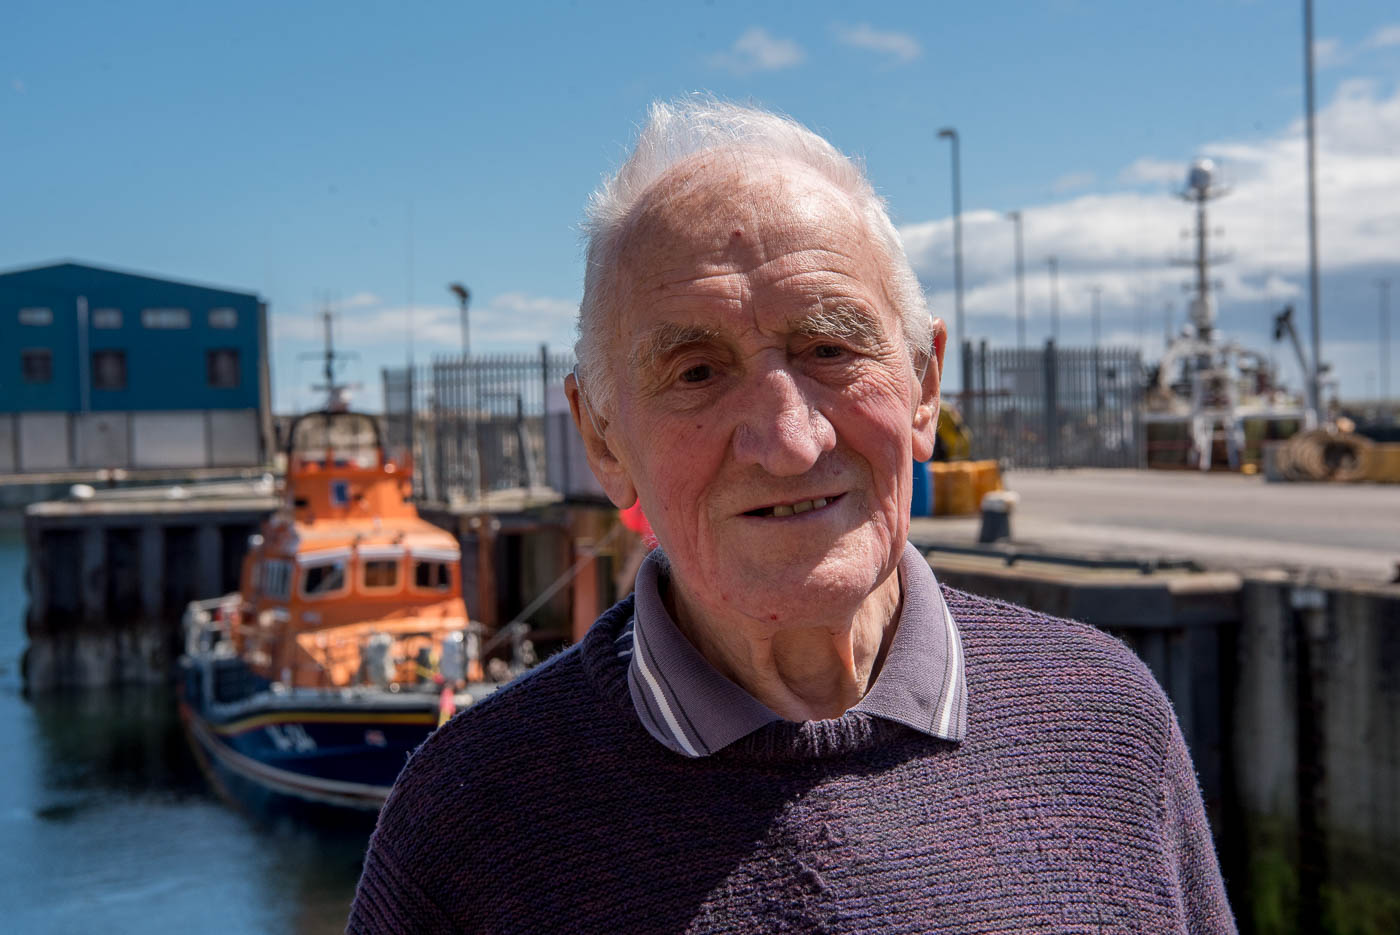 Jack Provan is celebrating 60 years of involvement with the Fraserburgh RNLI